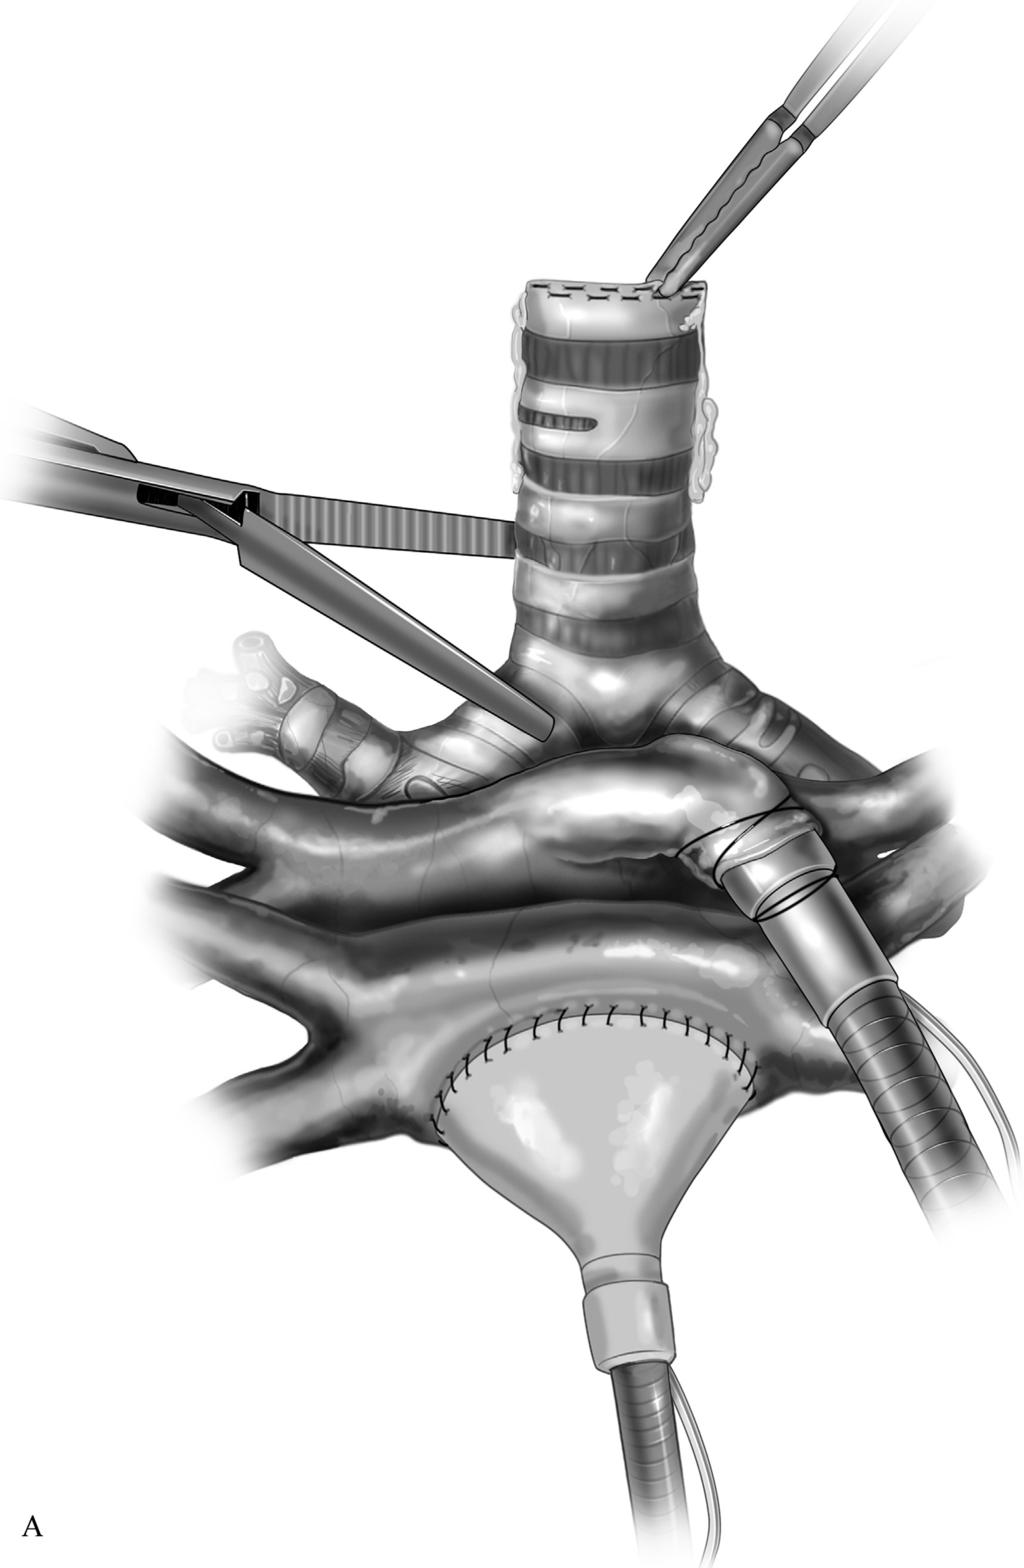 Ex vivo lung perfusion 437 Figure 3